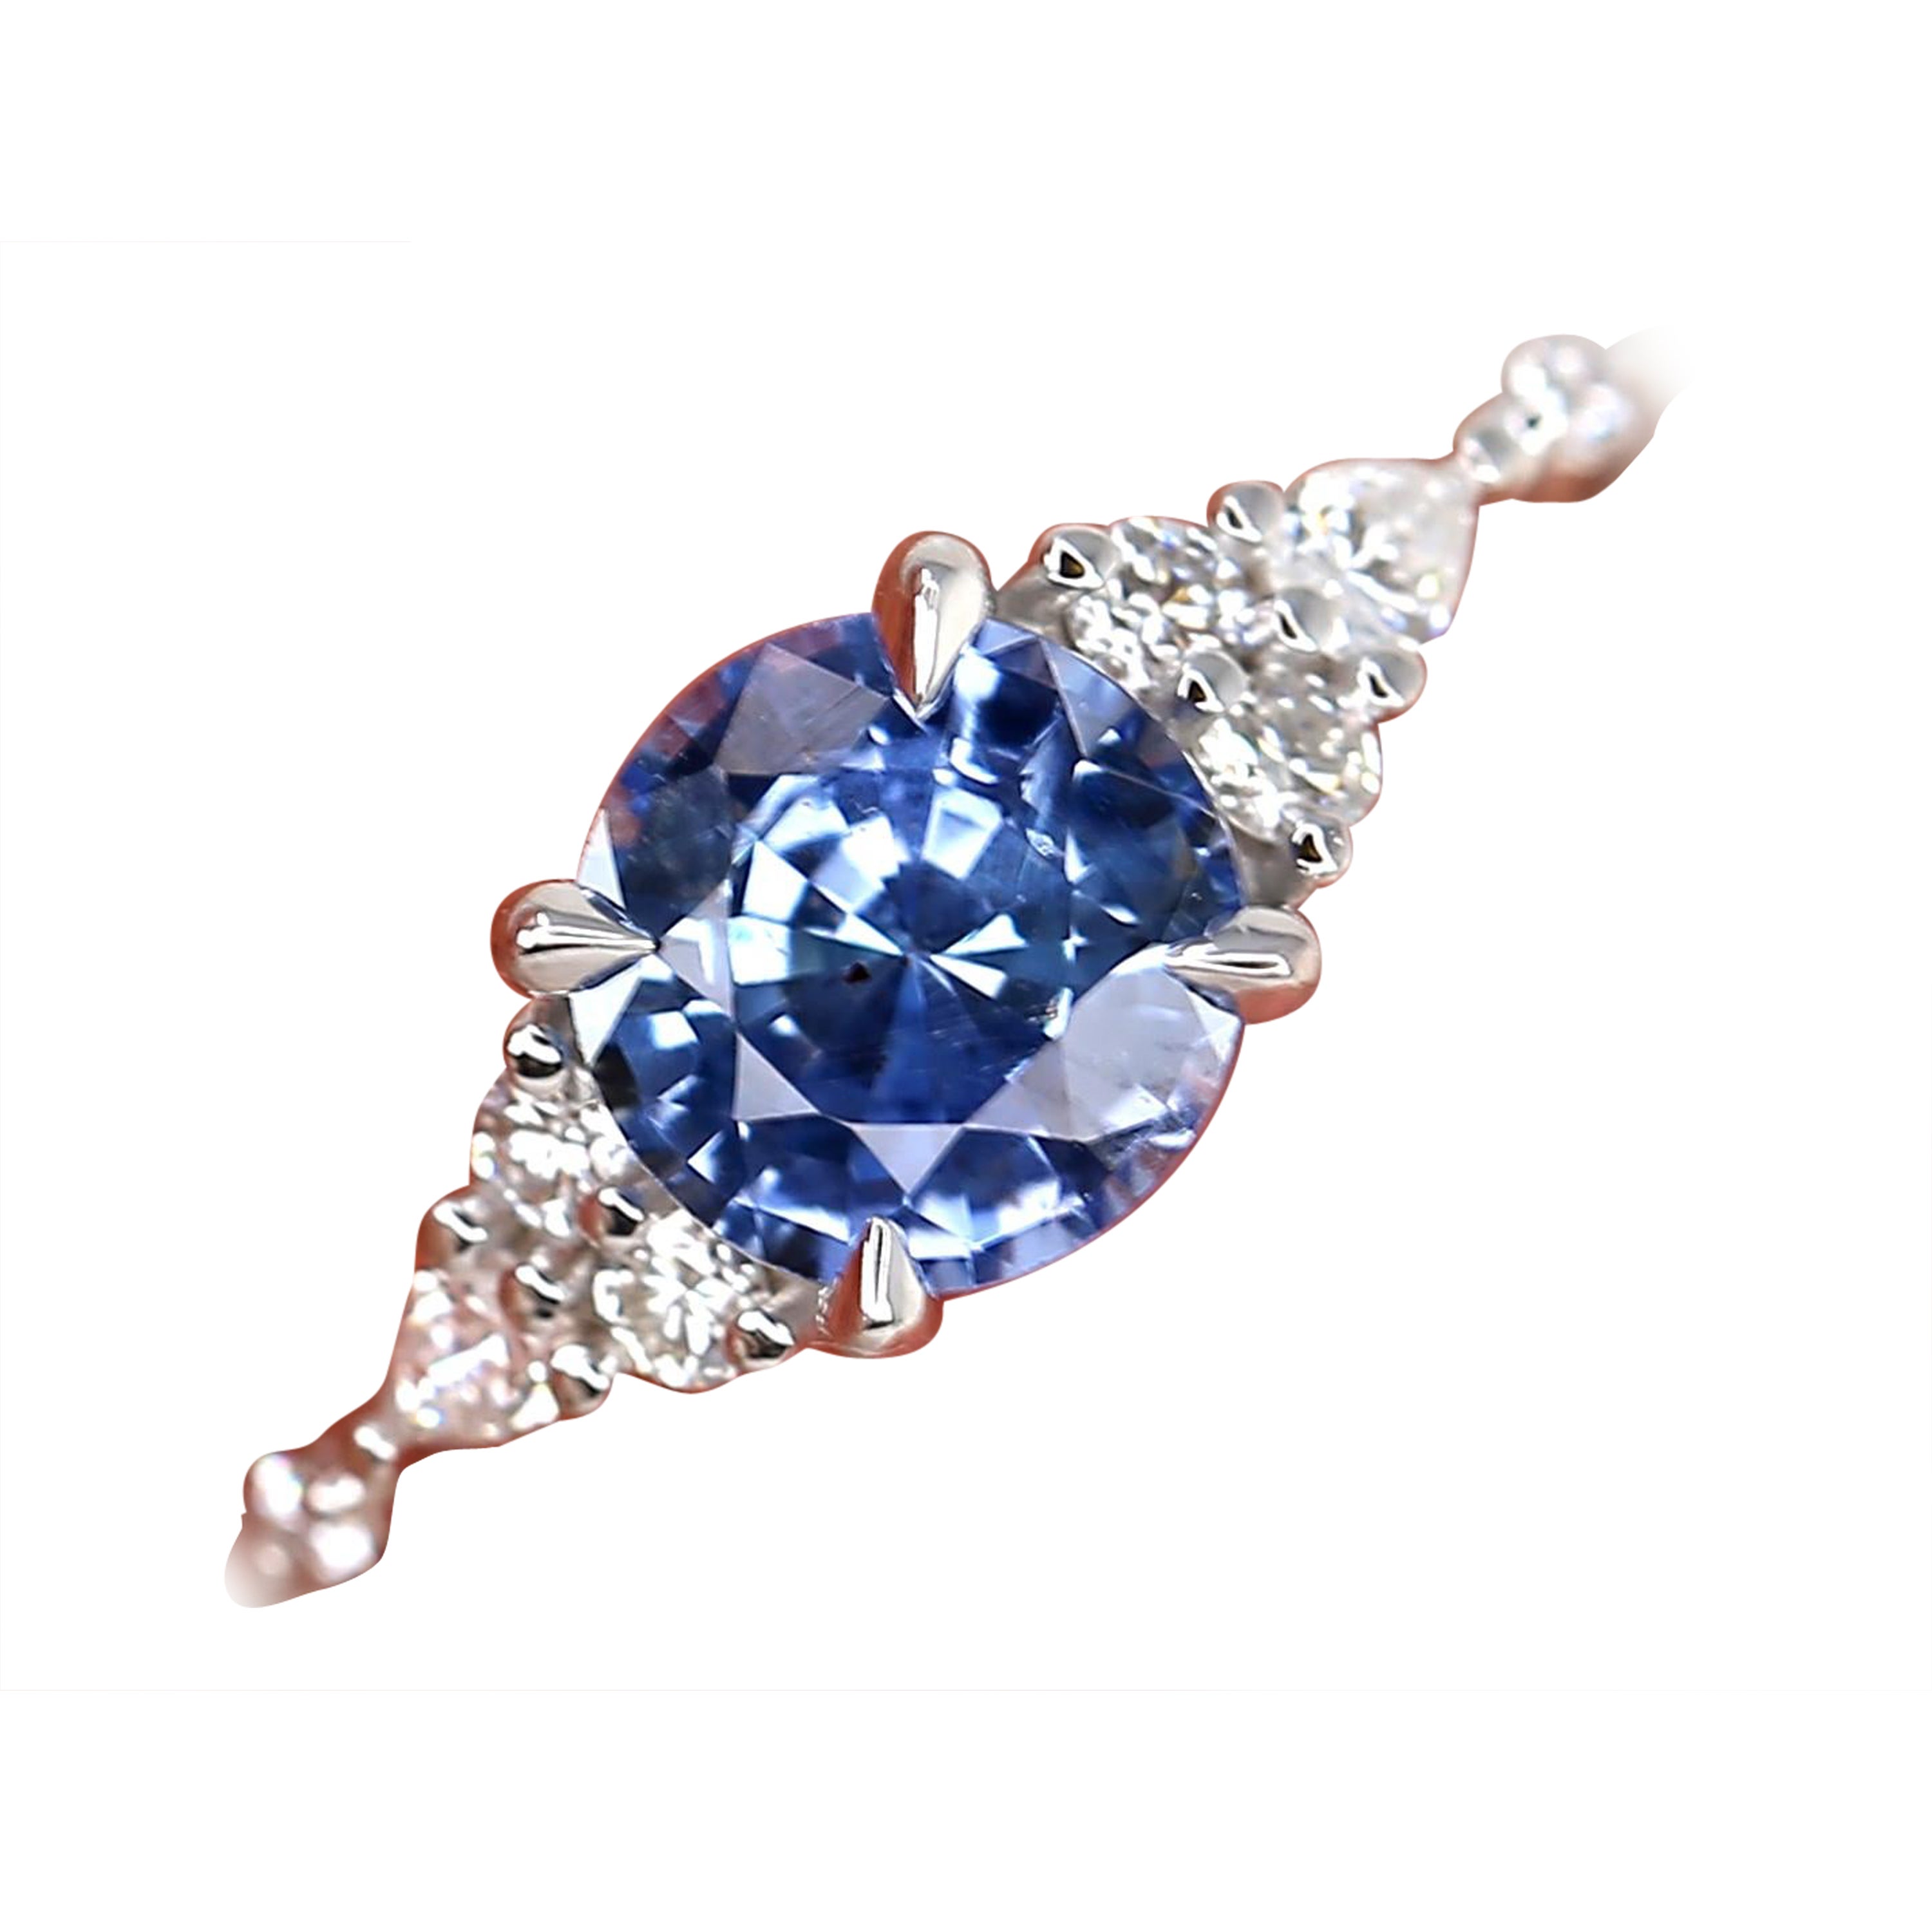 Add a touch of whimsy to your jewelry collection with our Anastasia ring. This 14kt white gold piece features a rare cornflower sapphire surrounded by dazzling diamonds, creating a dreamy cluster design. Perfect for any special occasion or as a